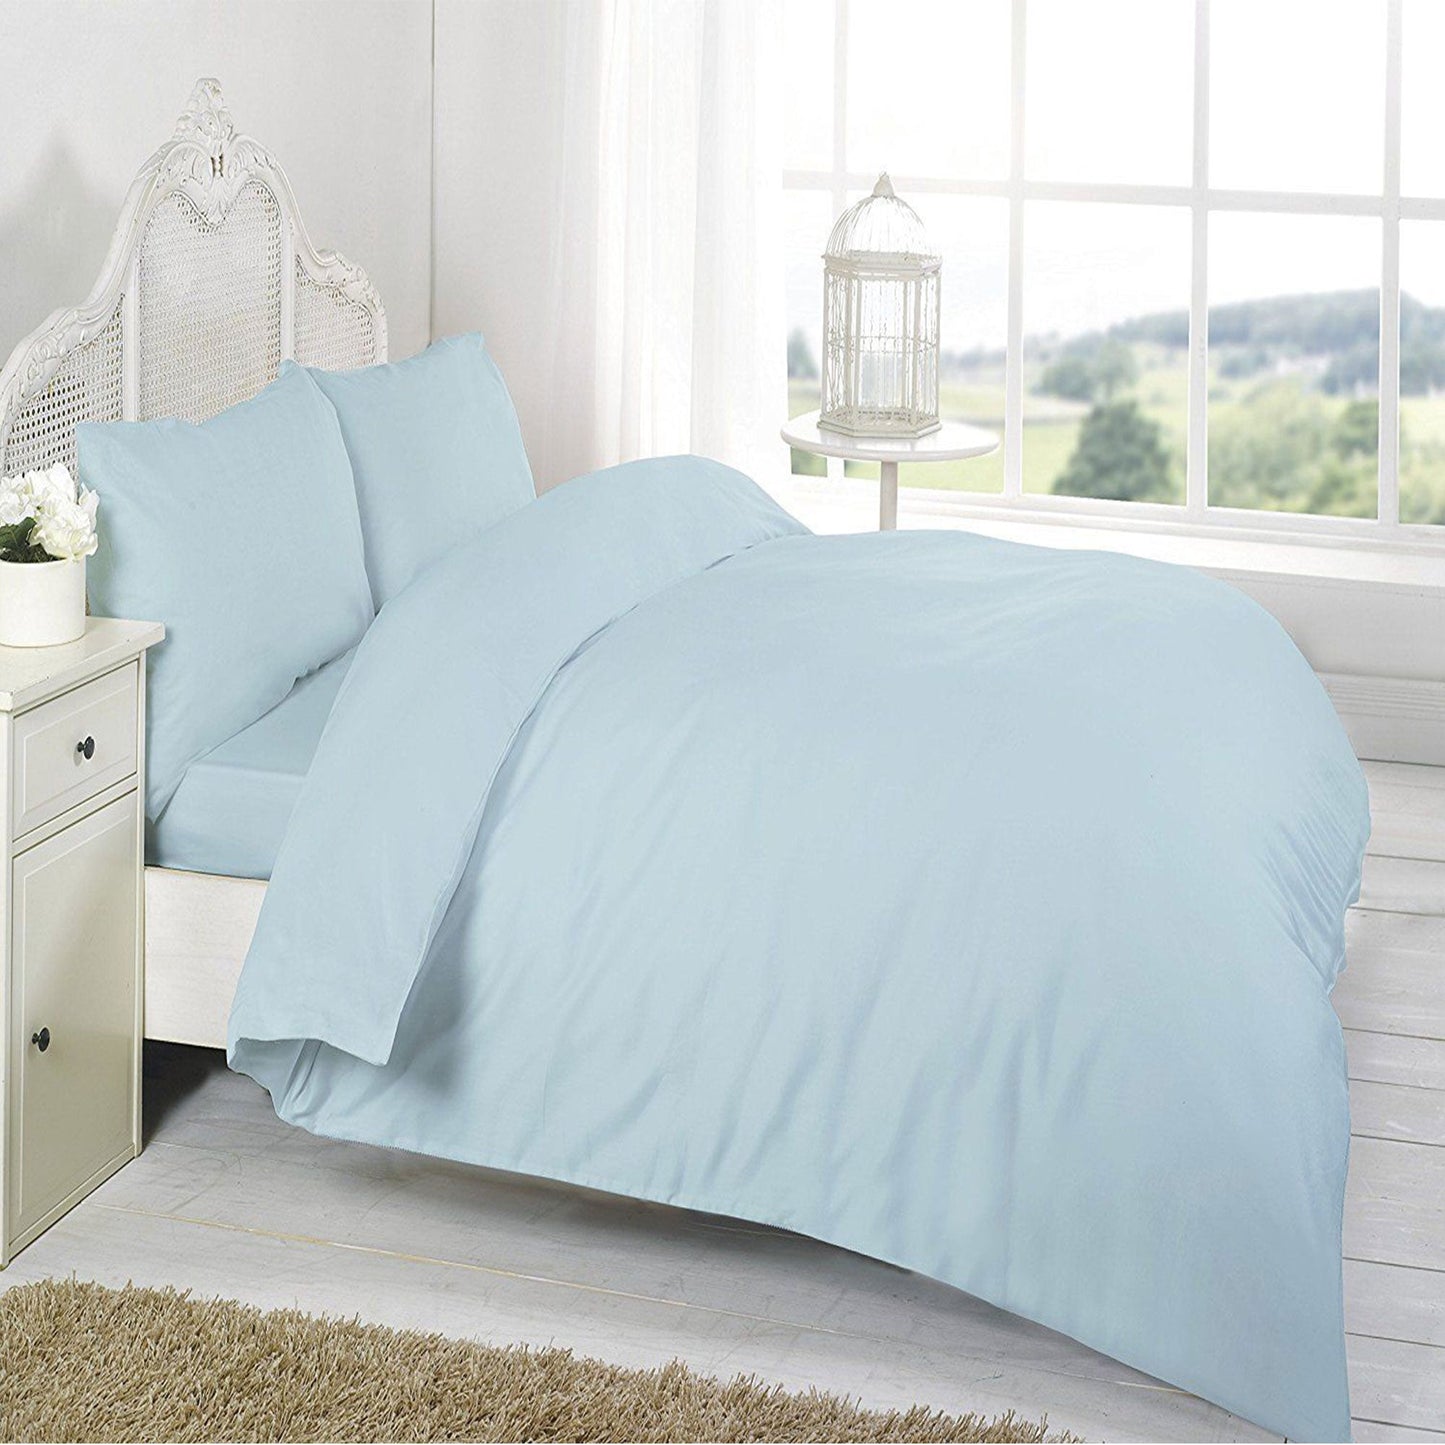 Egyptian Cotton T200 Duvet Cover Set In Several Sizes & Color, Pillow Cases Sold Separately - TheComfortshop.co.ukDuvet Covers0721718961871thecomfortshopTheComfortshop.co.ukAqua T200 Duvet SingleAquaSingleEgyptian Cotton T200 Duvet Cover Set In Several Sizes & Color, Pillow Cases Sold Separately - TheComfortshop.co.uk